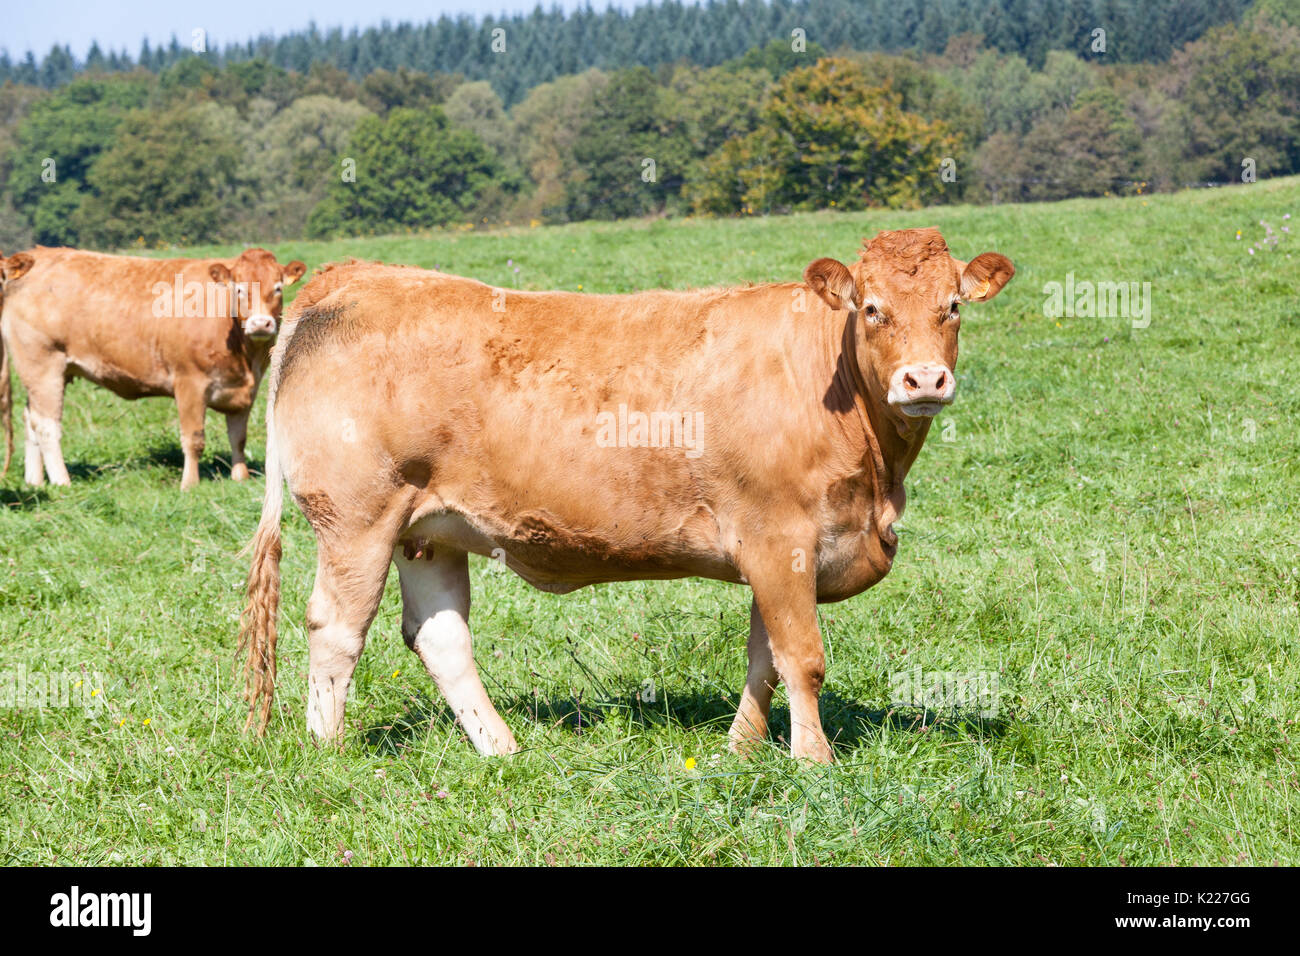 Large brown Limousin beef cow standing sideways looking at the camera in a green grassy pasture. This hardy French breed of cattle is bred for meat p Stock Photo